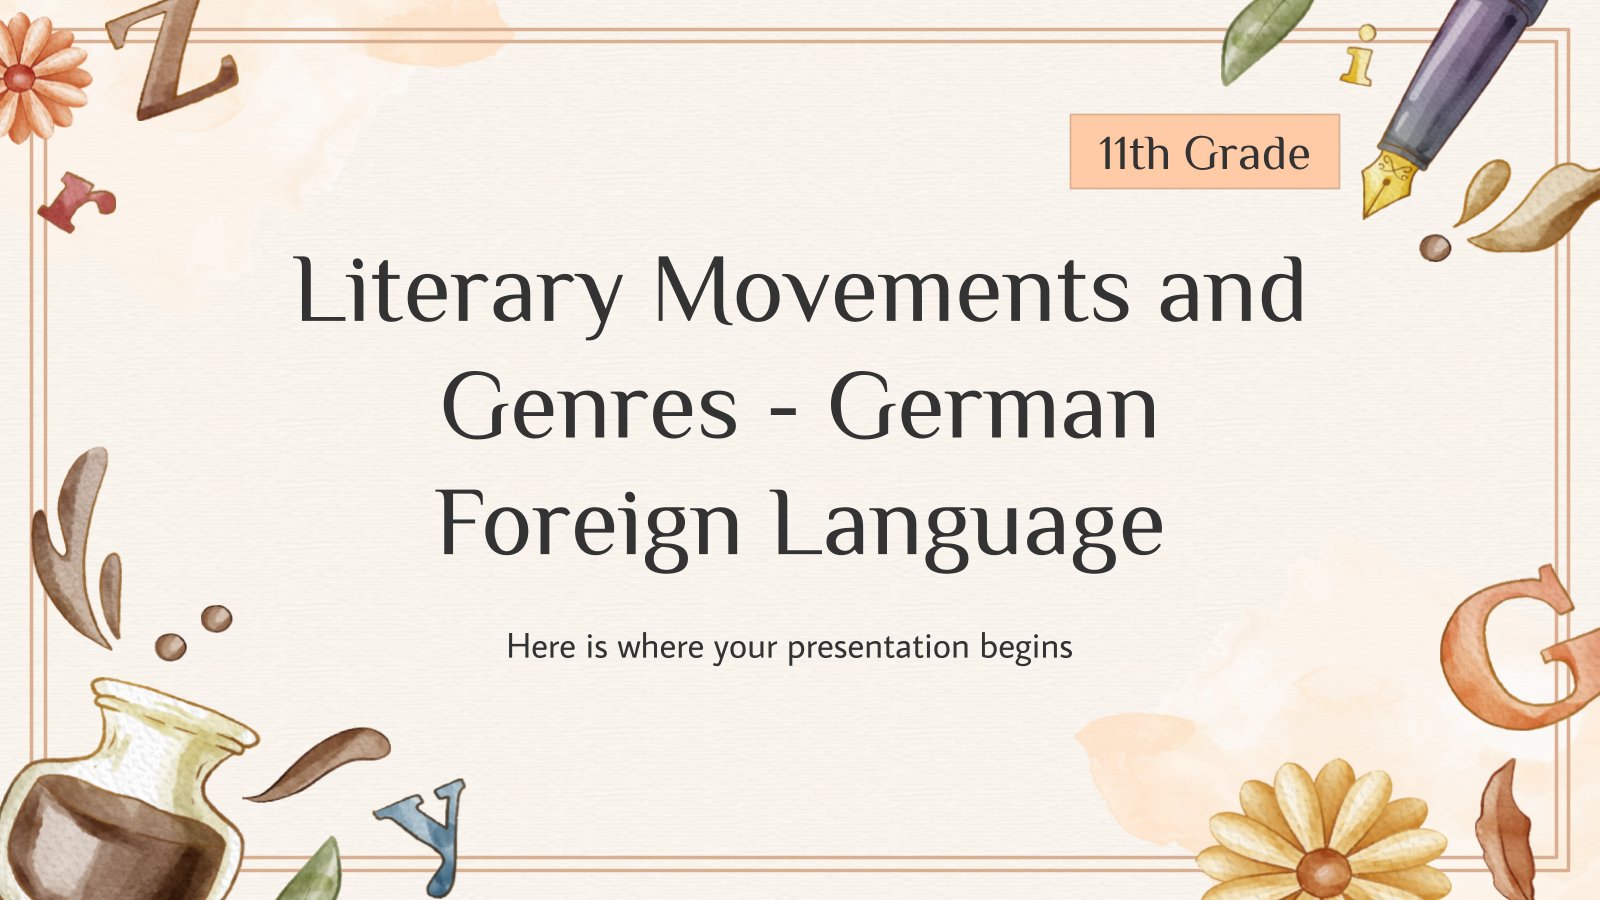 Literary Movements and Genres - German - Foreign Language - 11th Grade presentation template 